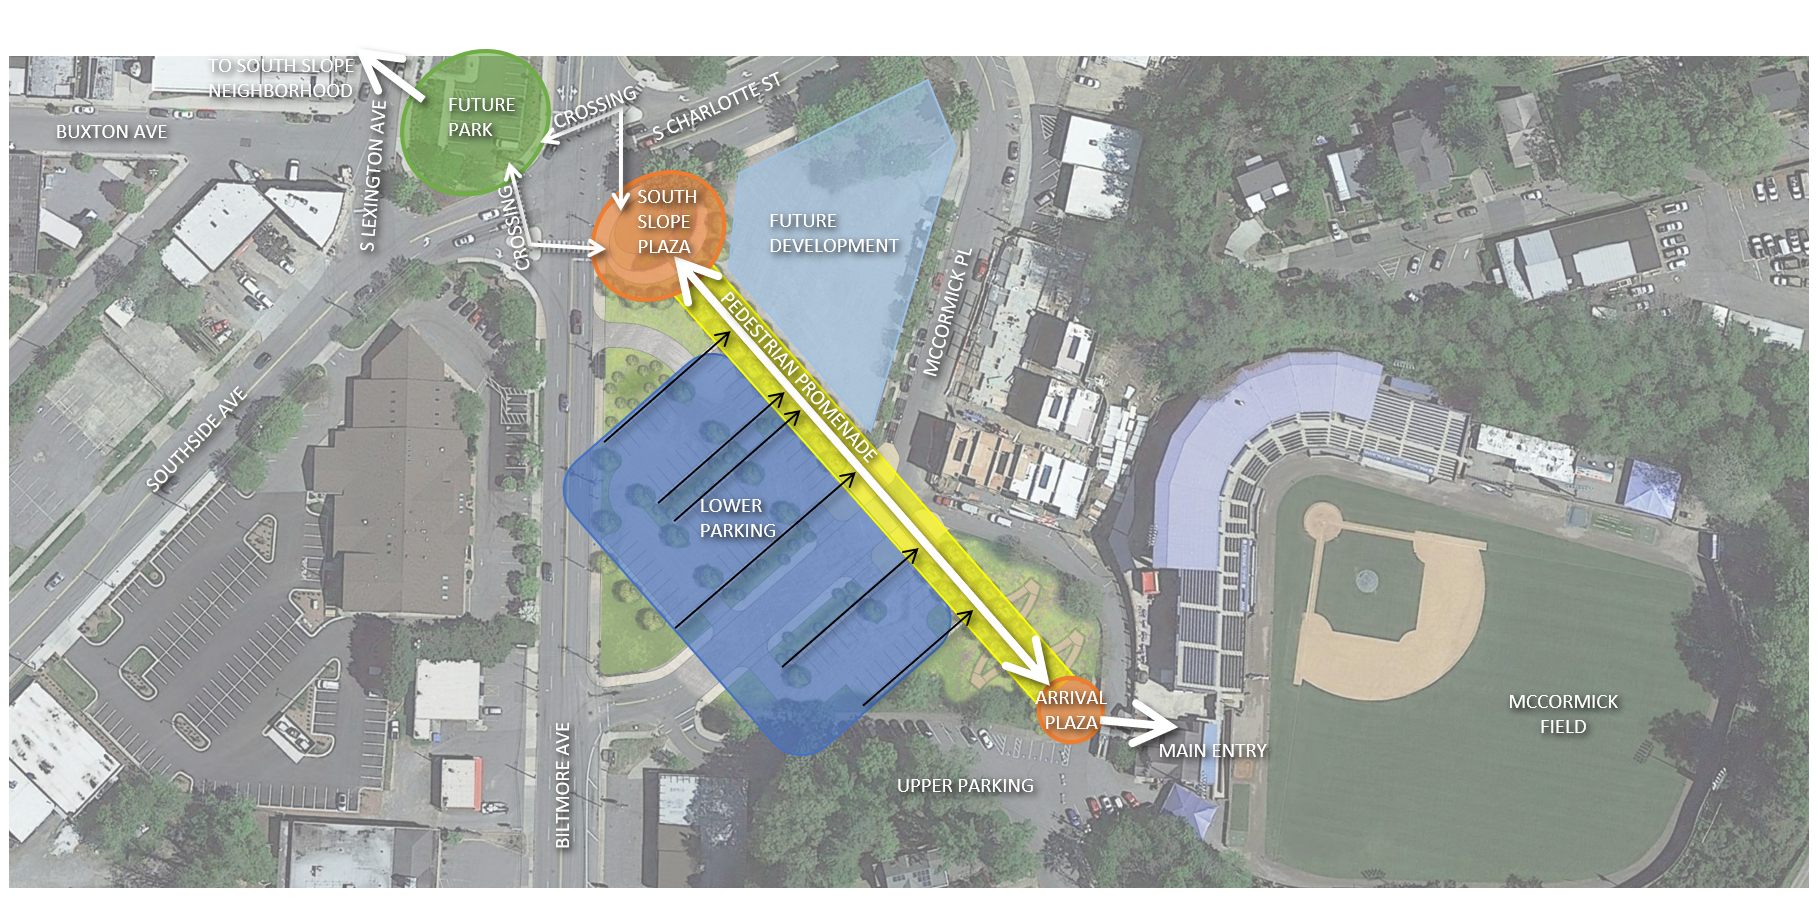 Mccormick Field - Connection.png